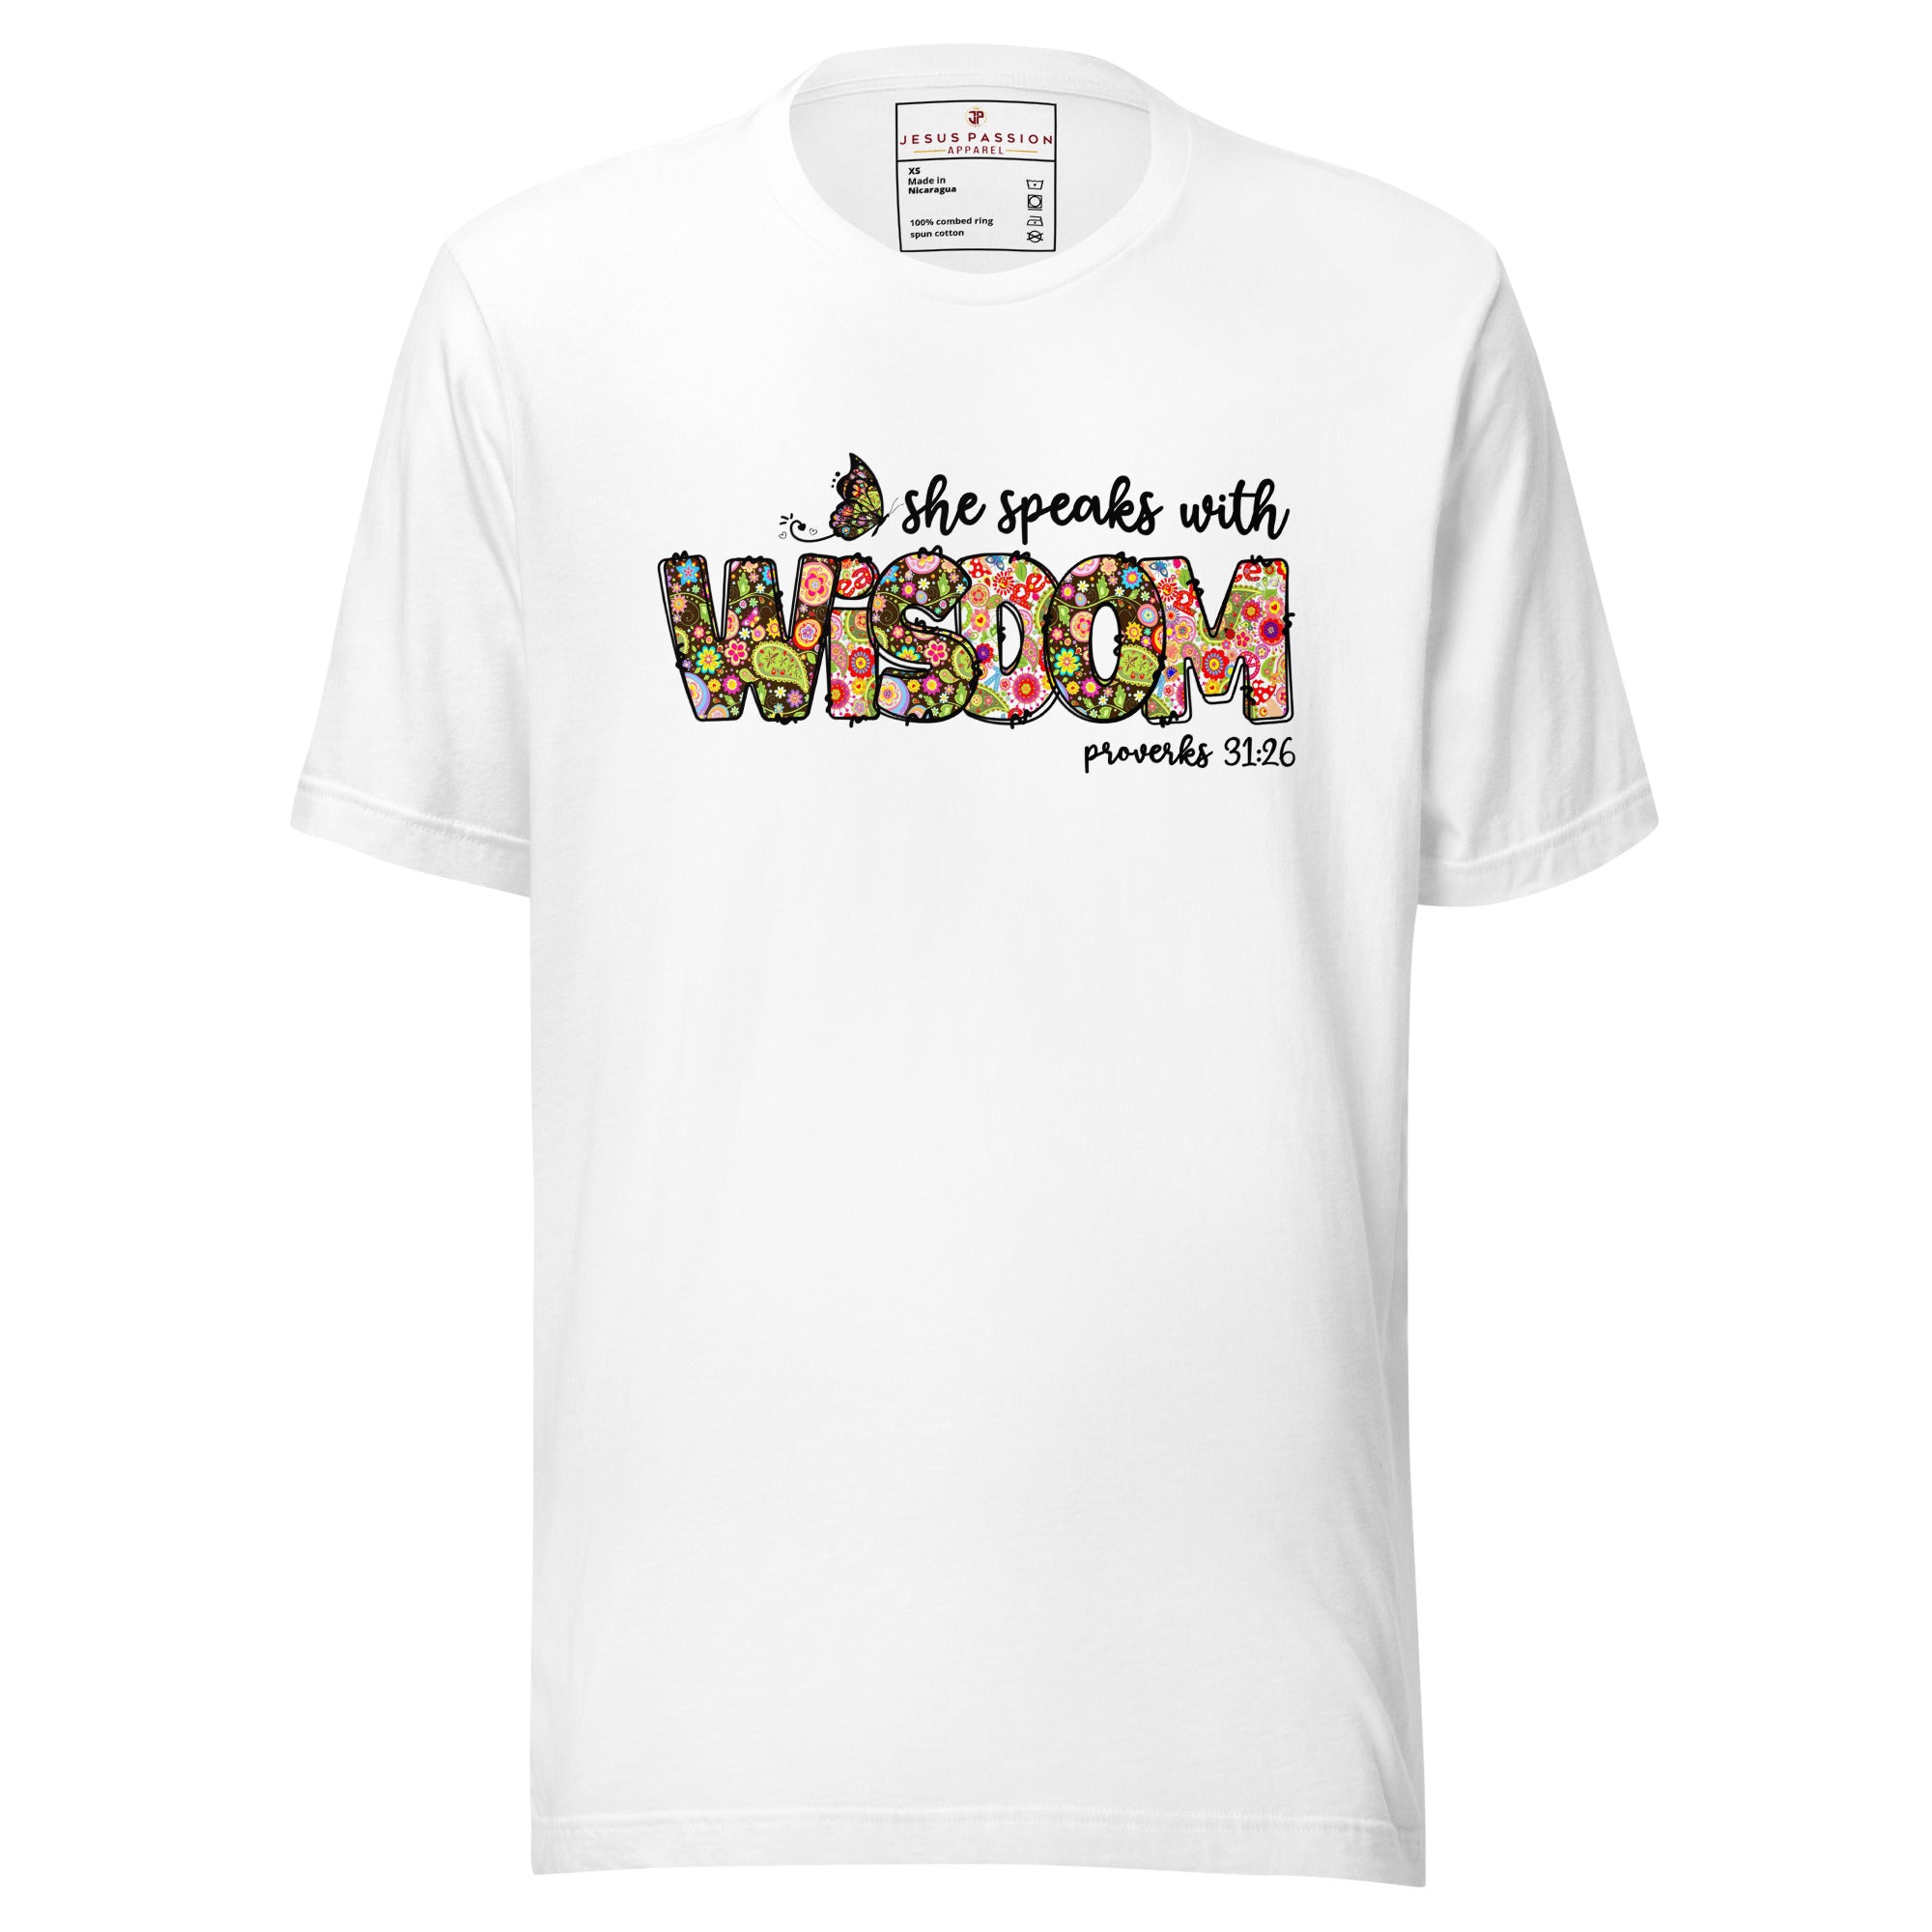 She Speaks With Wisdom Unisex-Fit T-Shirt Color: White Size: XS Jesus Passion Apparel